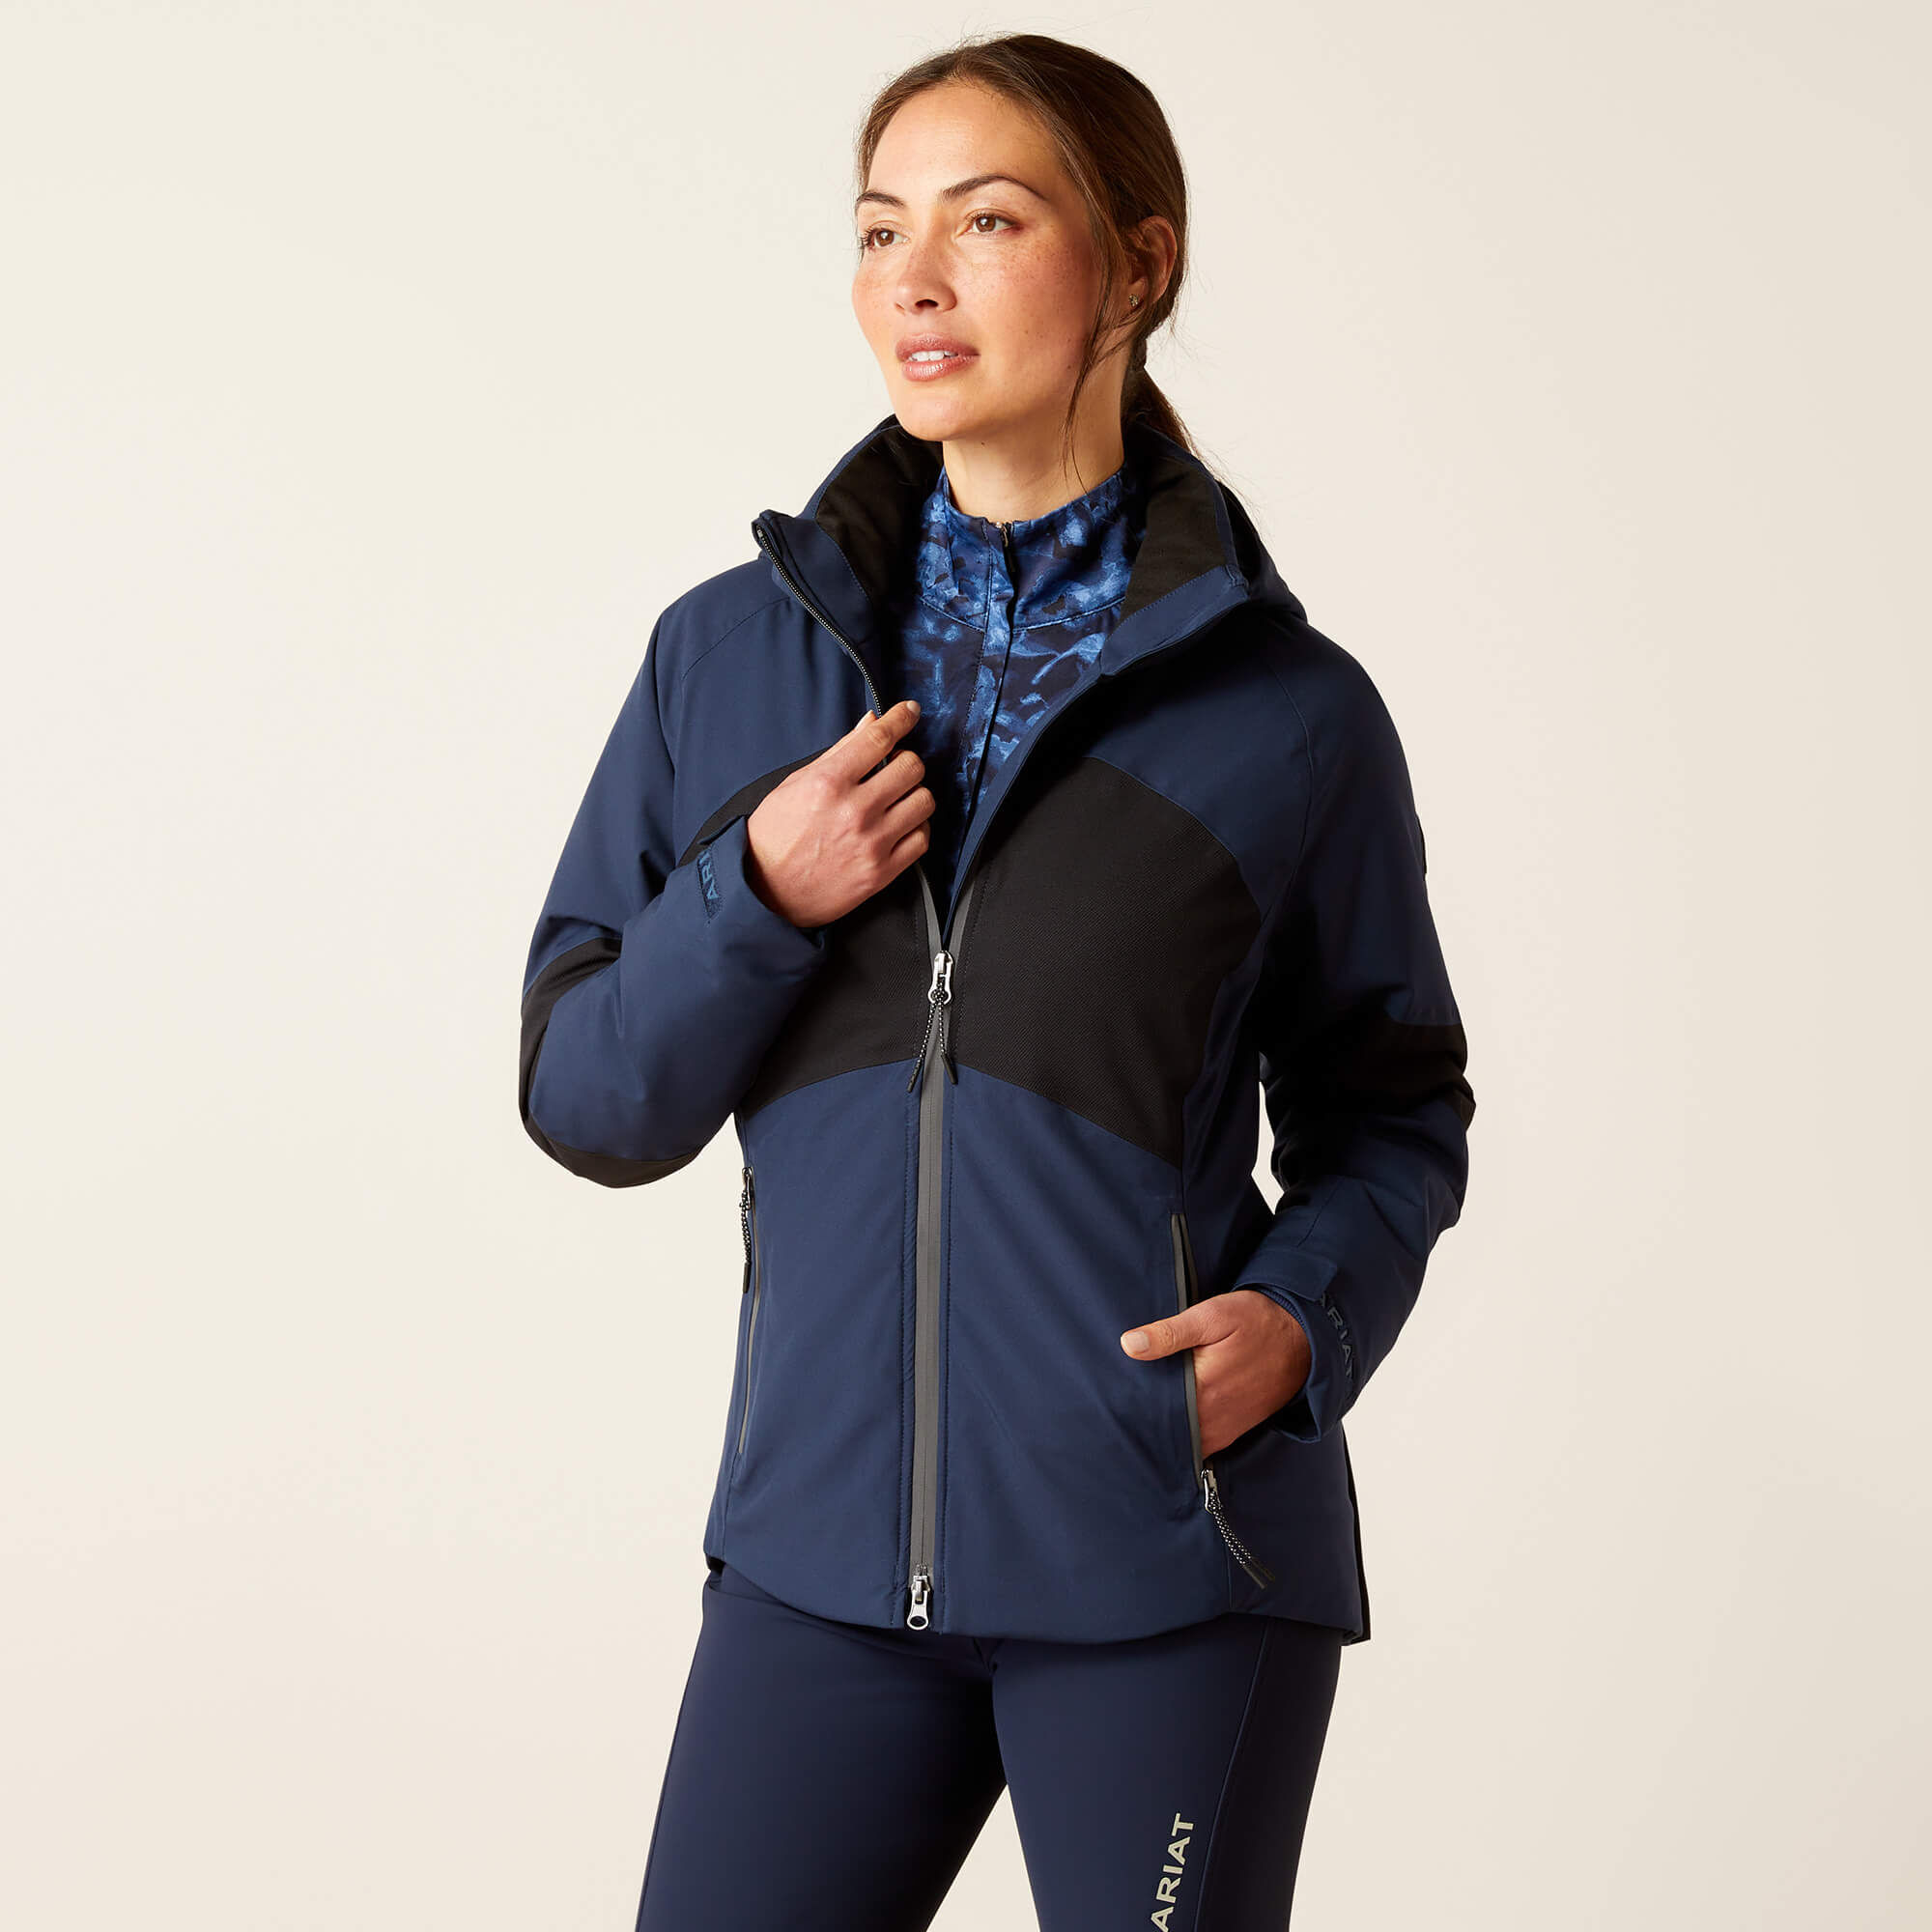 Women's Valor Jacket in Navy Colorblock, Size: Medium by Ariat